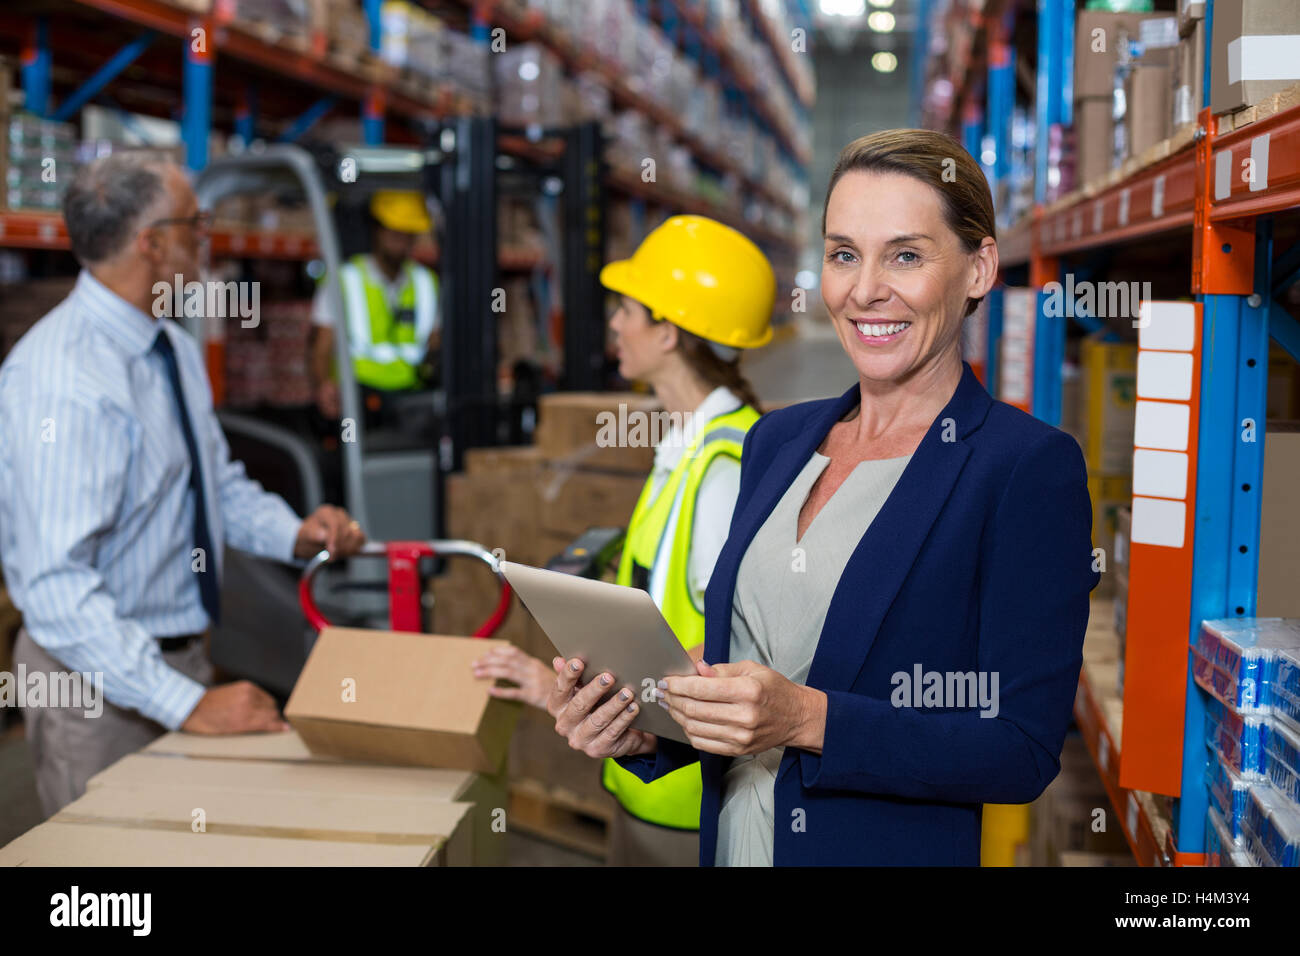 Warehouse manager holding digital tablet Stock Photo